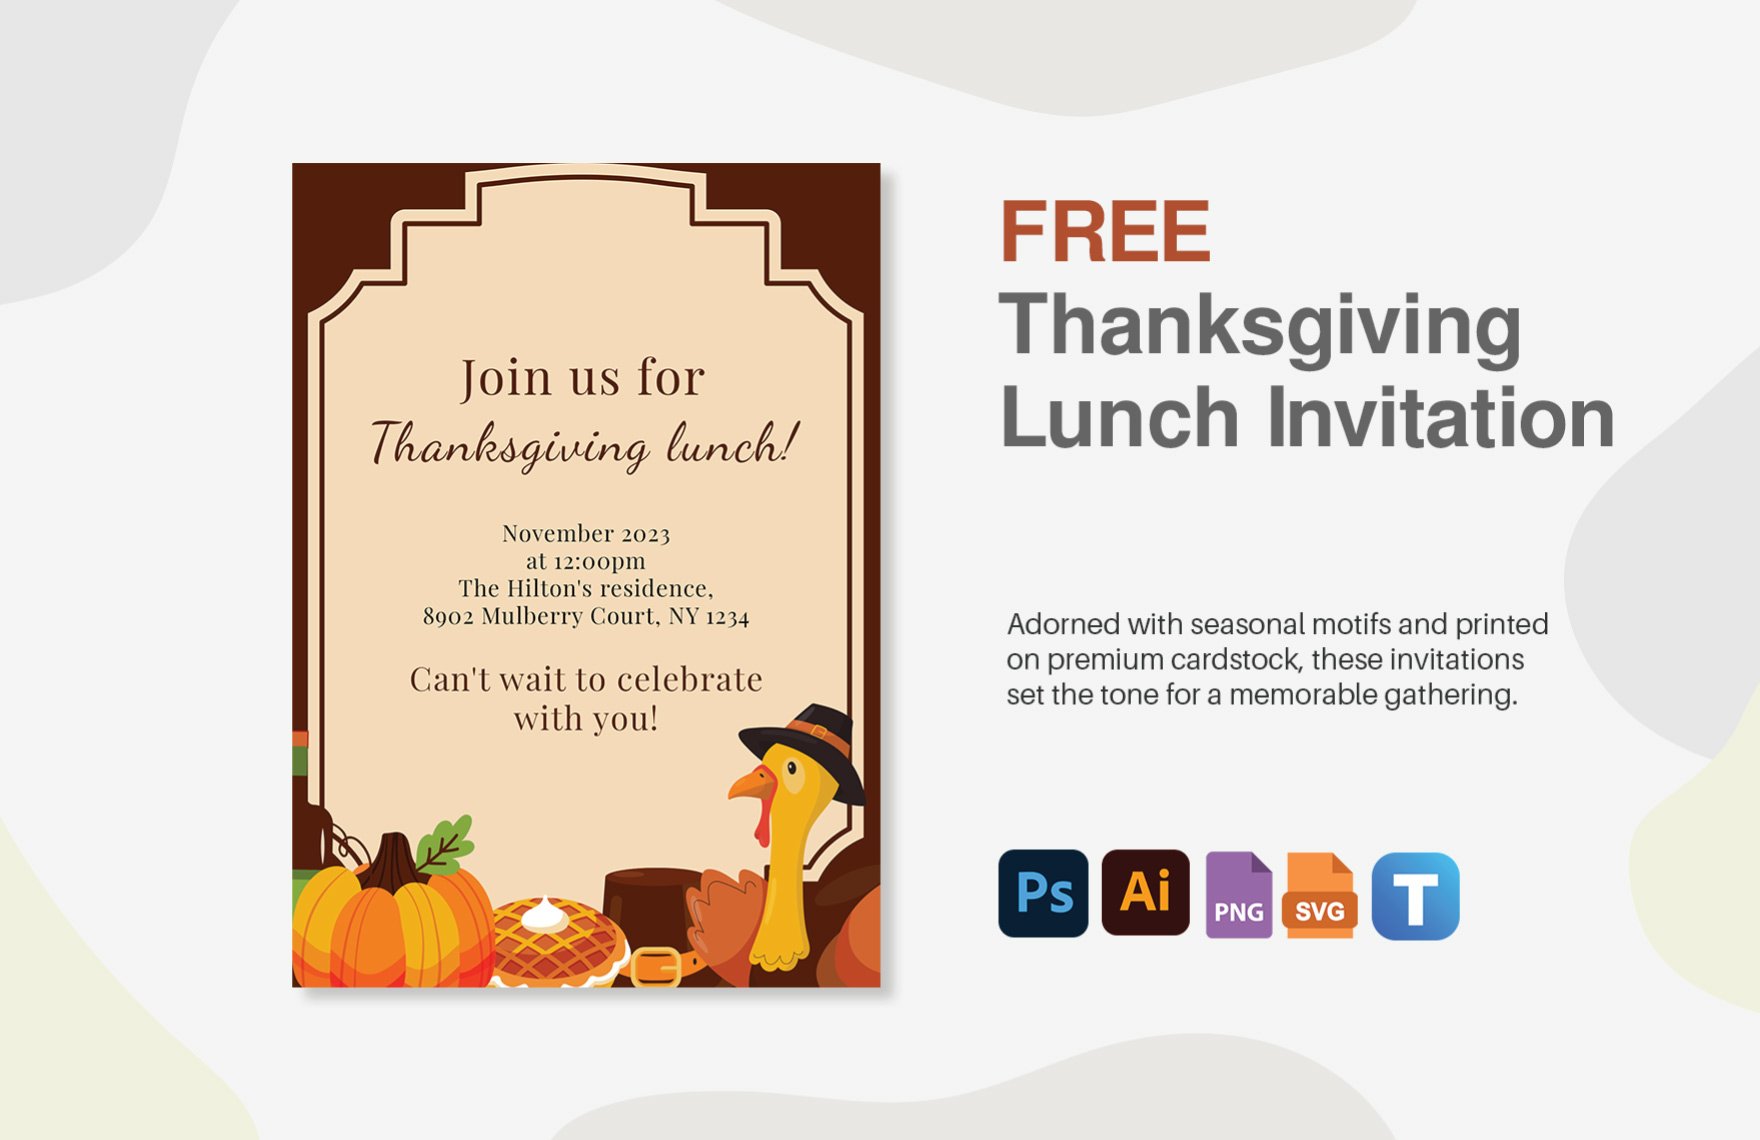 Free Thanksgiving Lunch Invitation in PDF, Illustrator, PSD, SVG, PNG